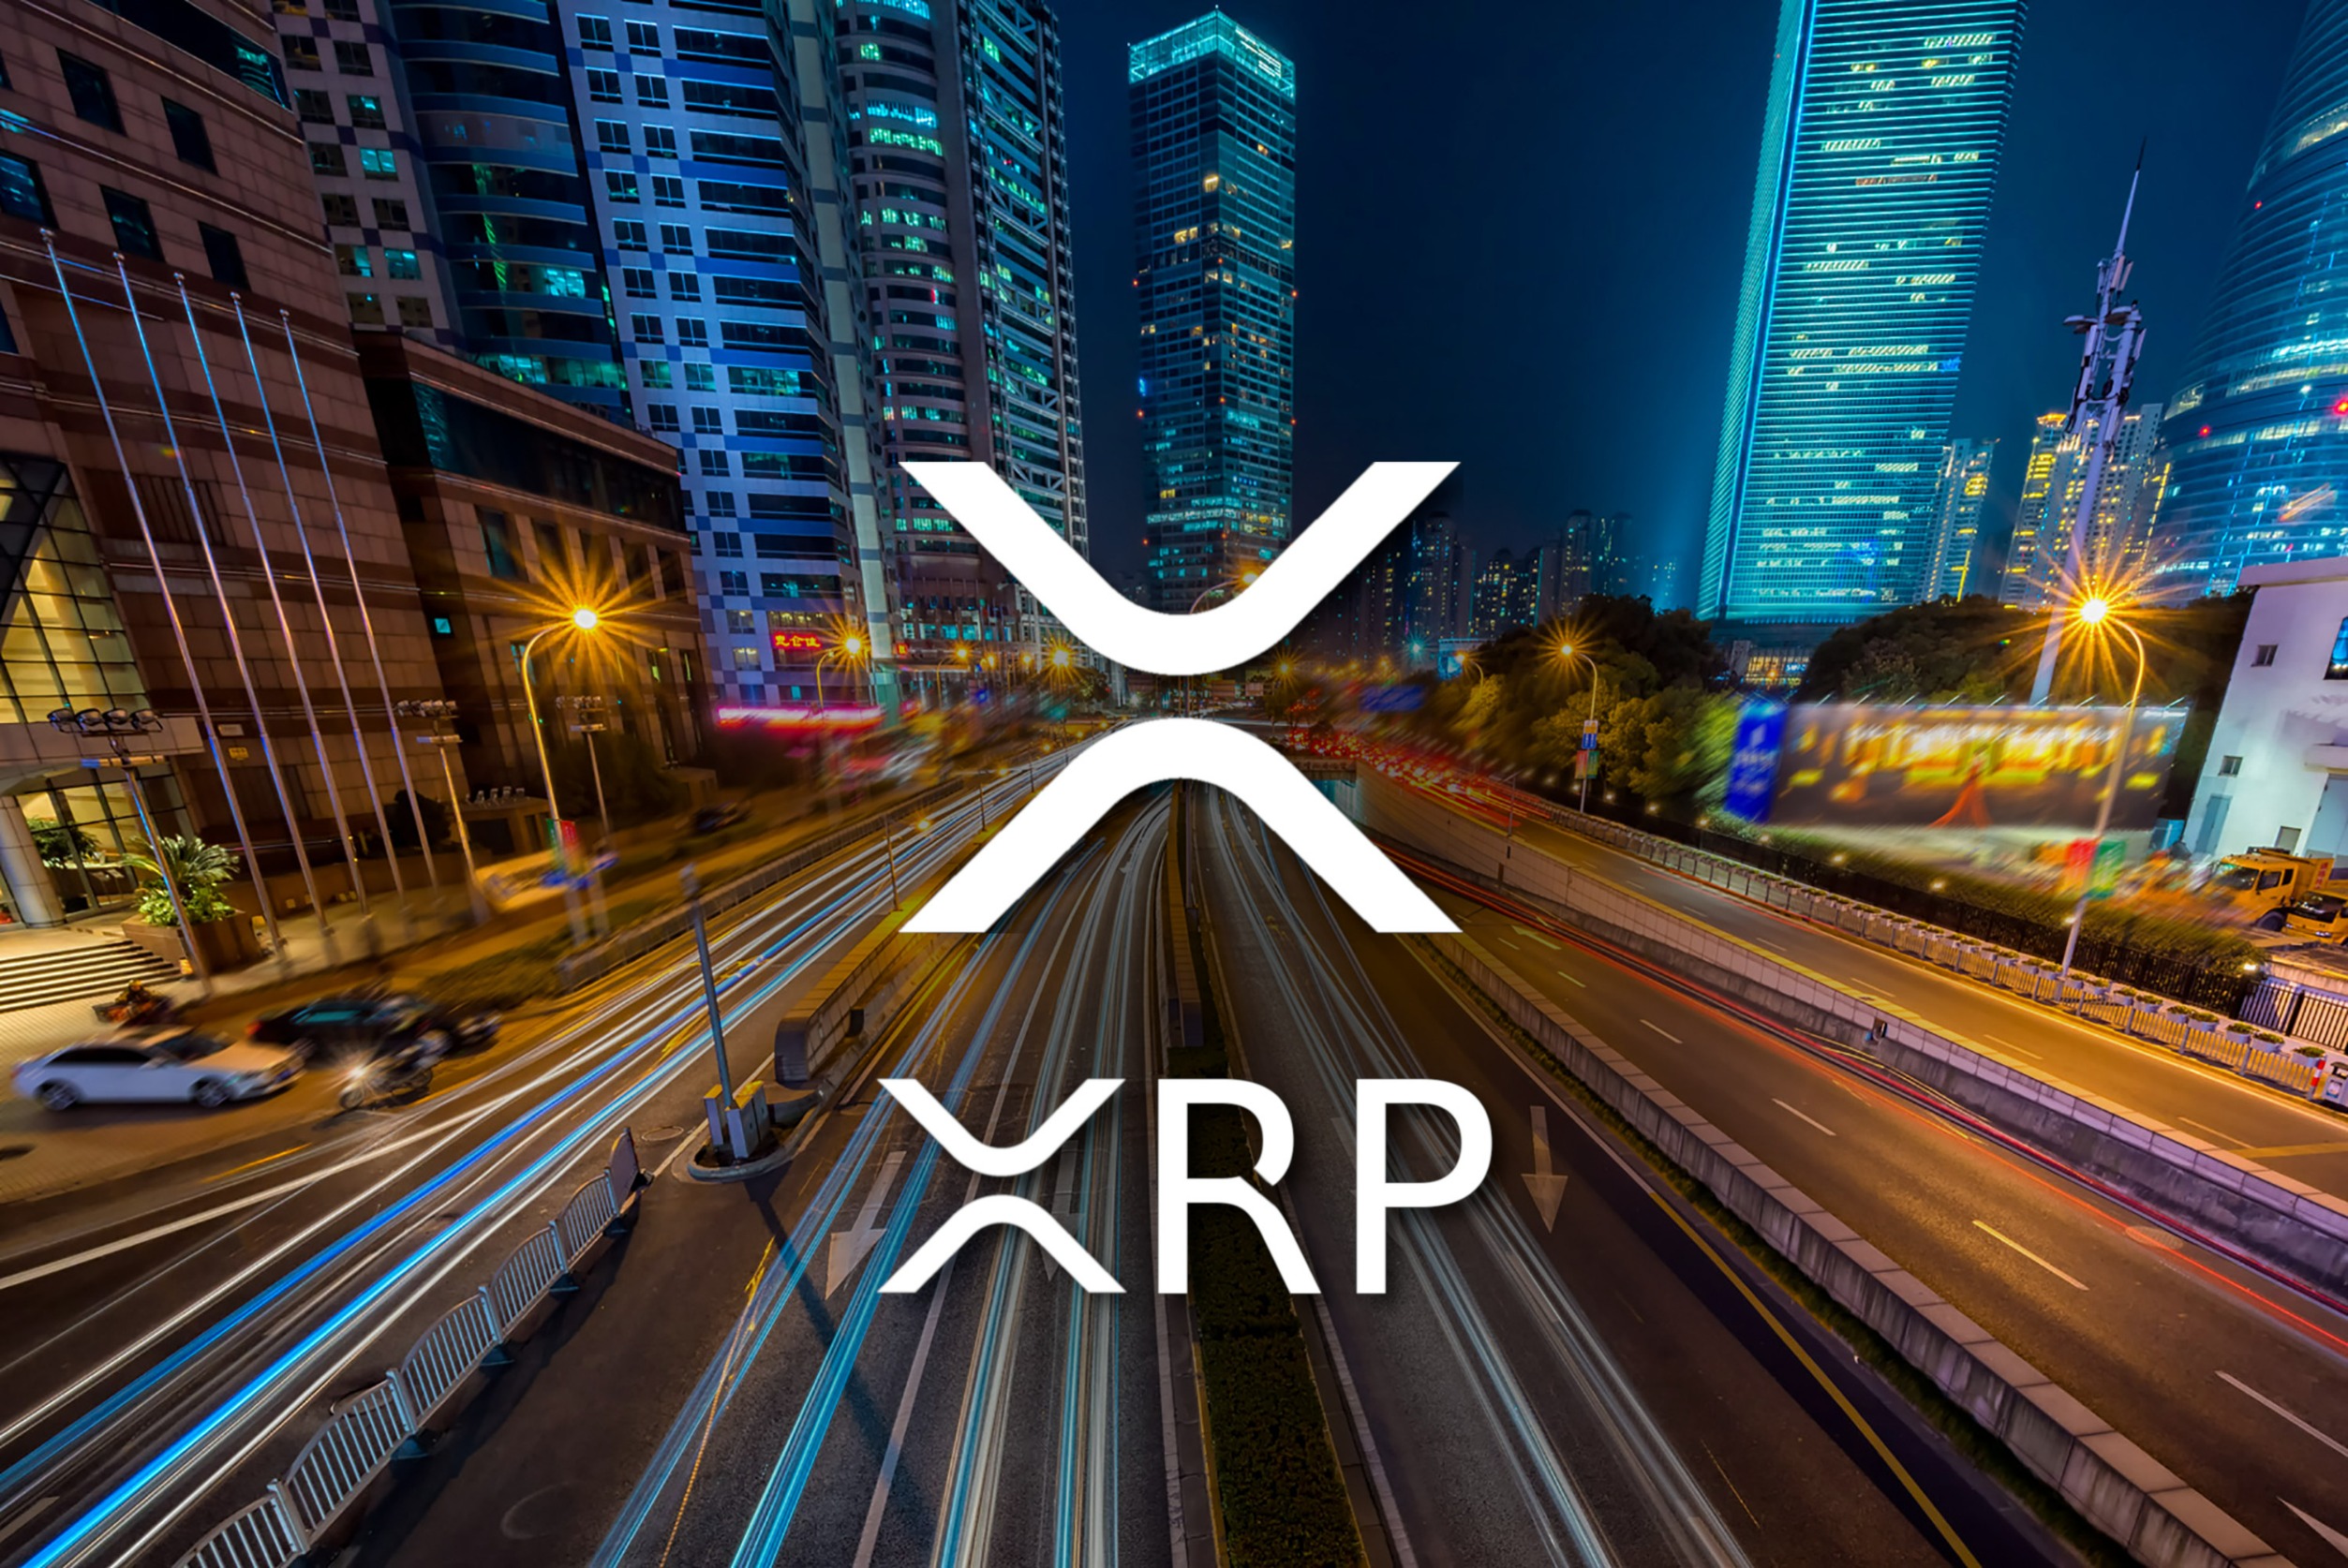 Crypto CEO Very Bullish On XRP Price, Sets Make Or Break Point